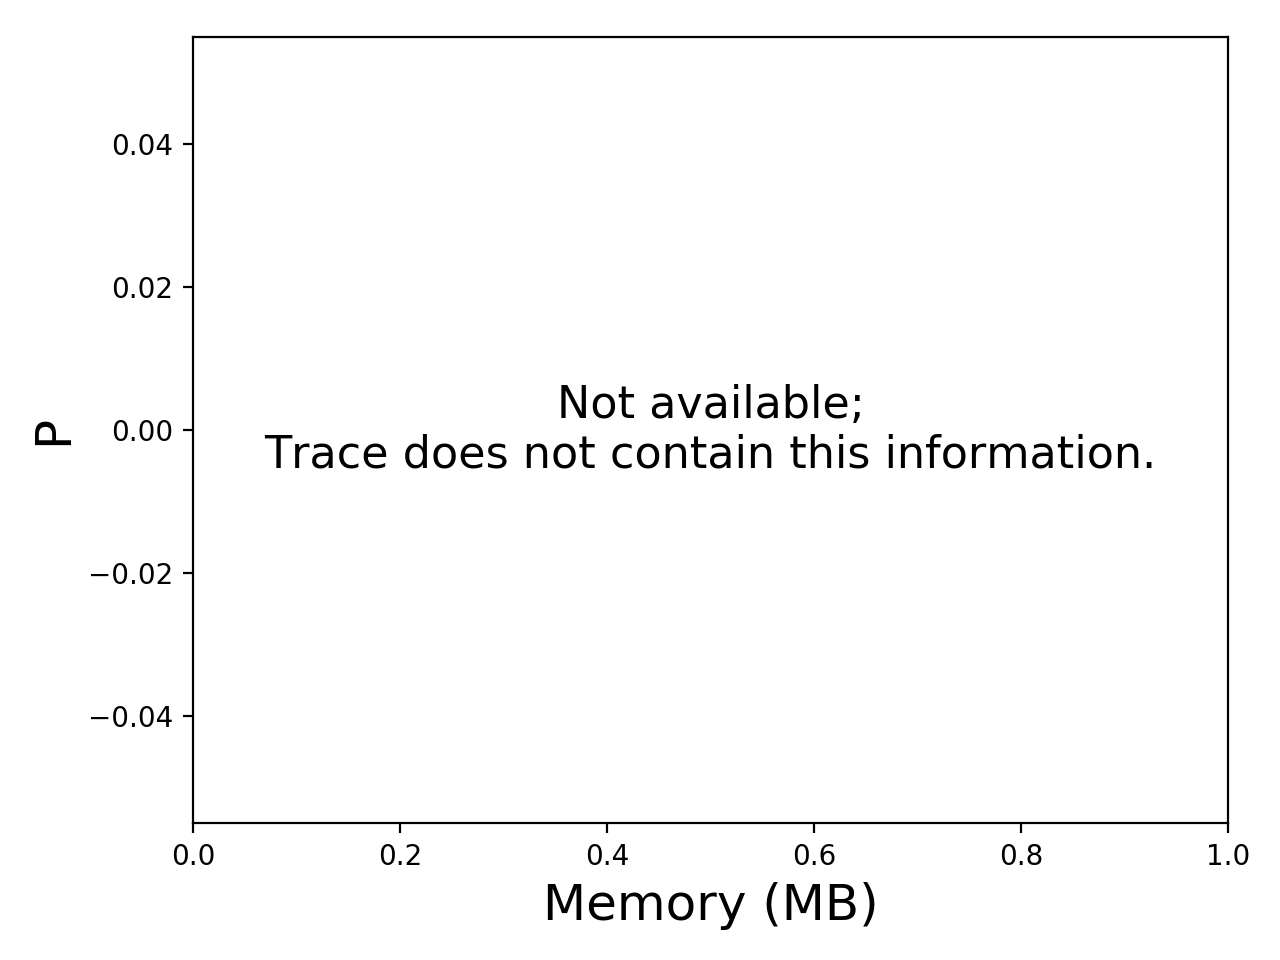 Task memory consumption graph for the Pegasus_P7 trace.